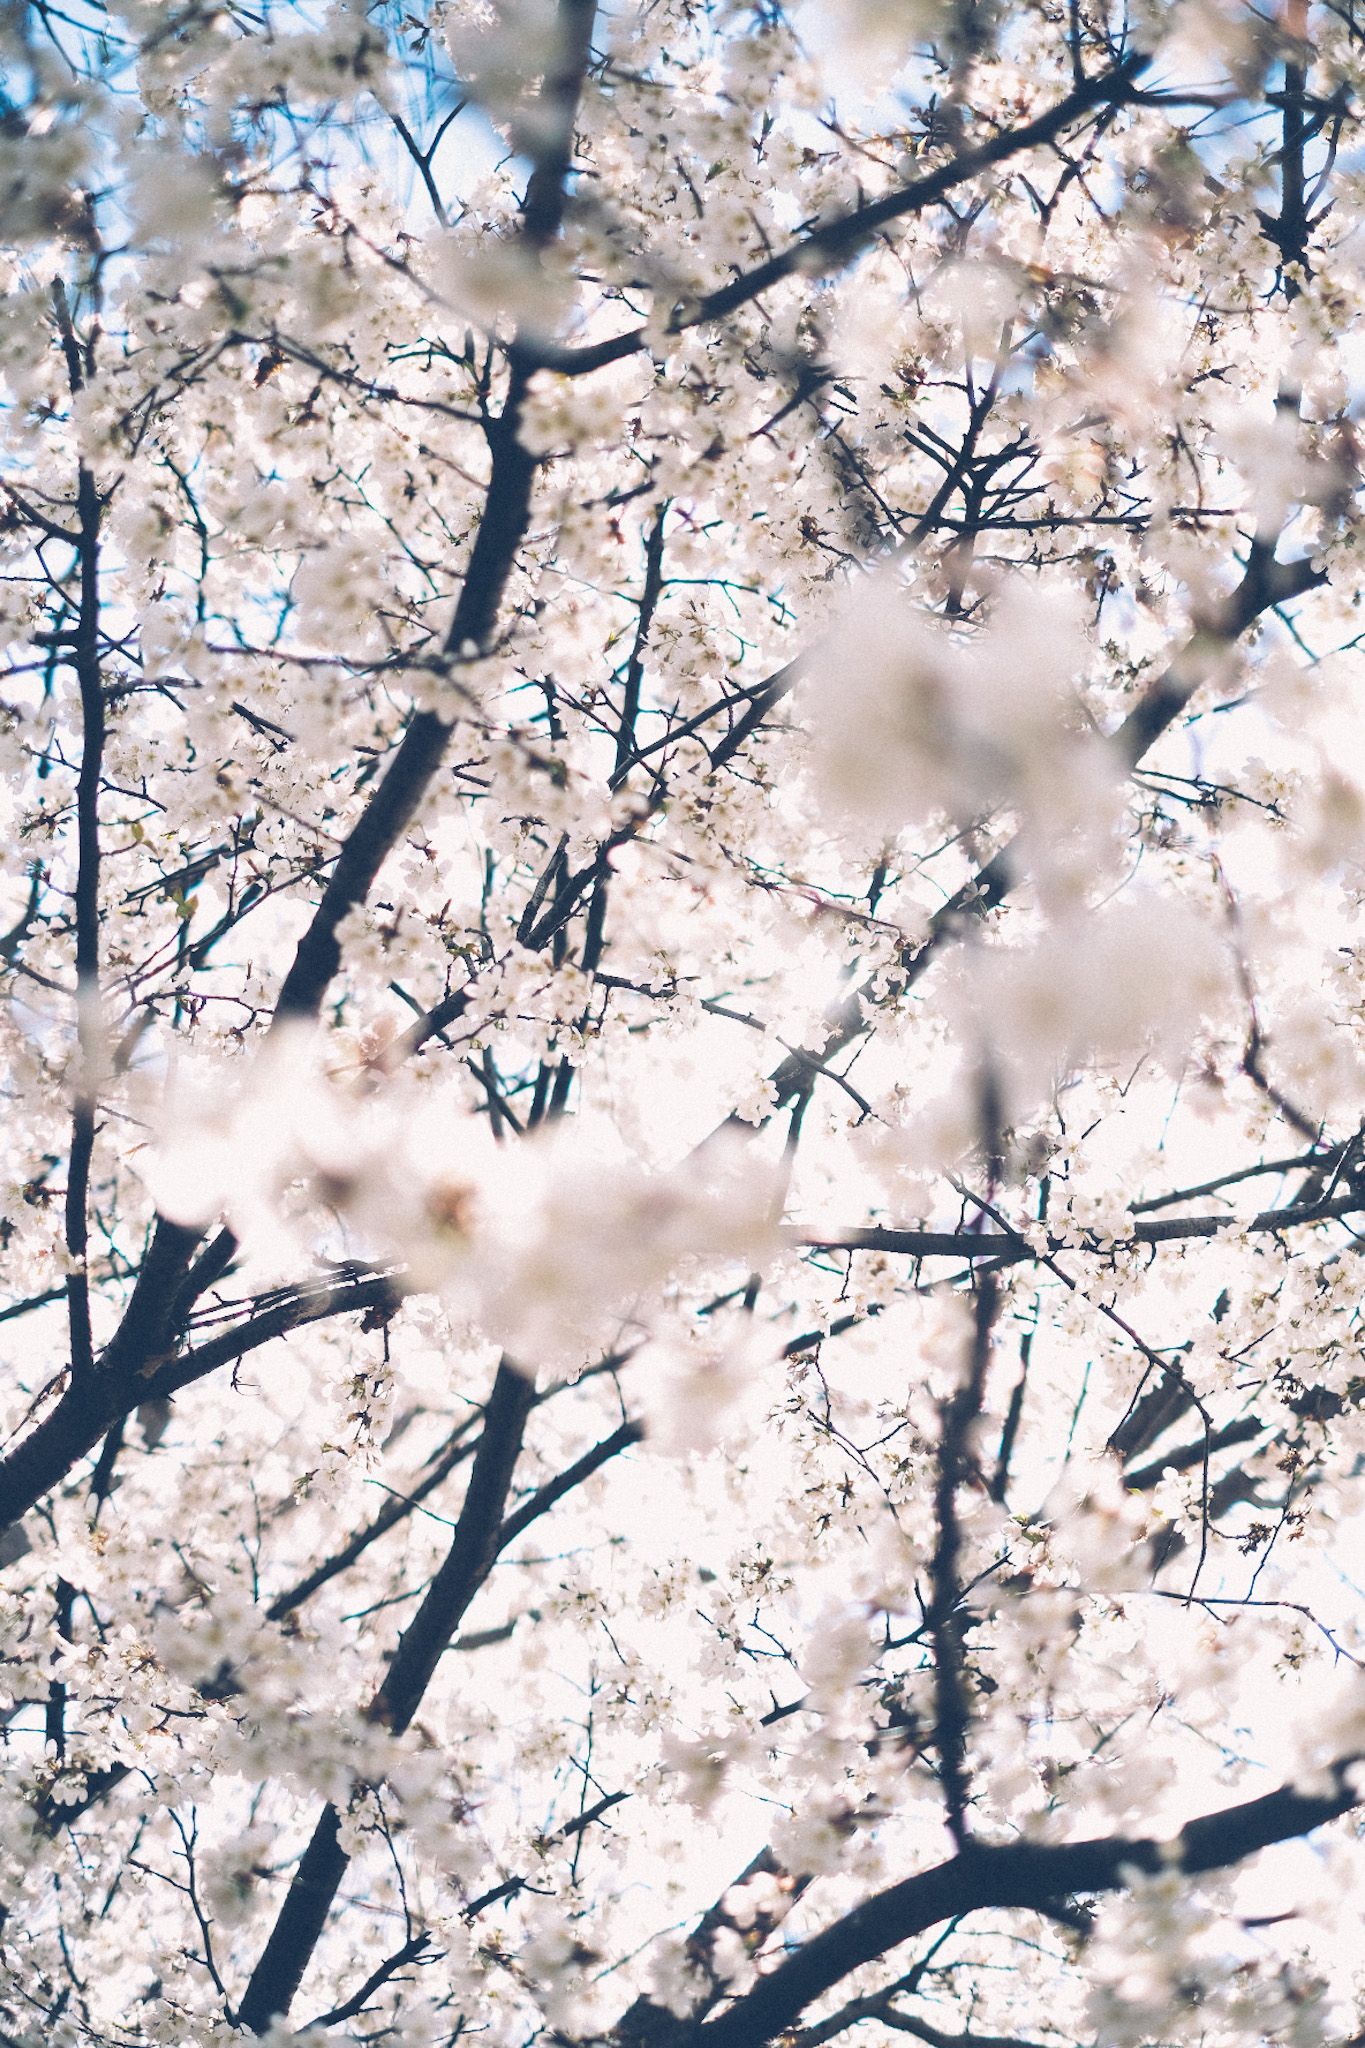 Branches of a tree hold white, blossoming flowers, filling the whole image as the blue sky peeks through.